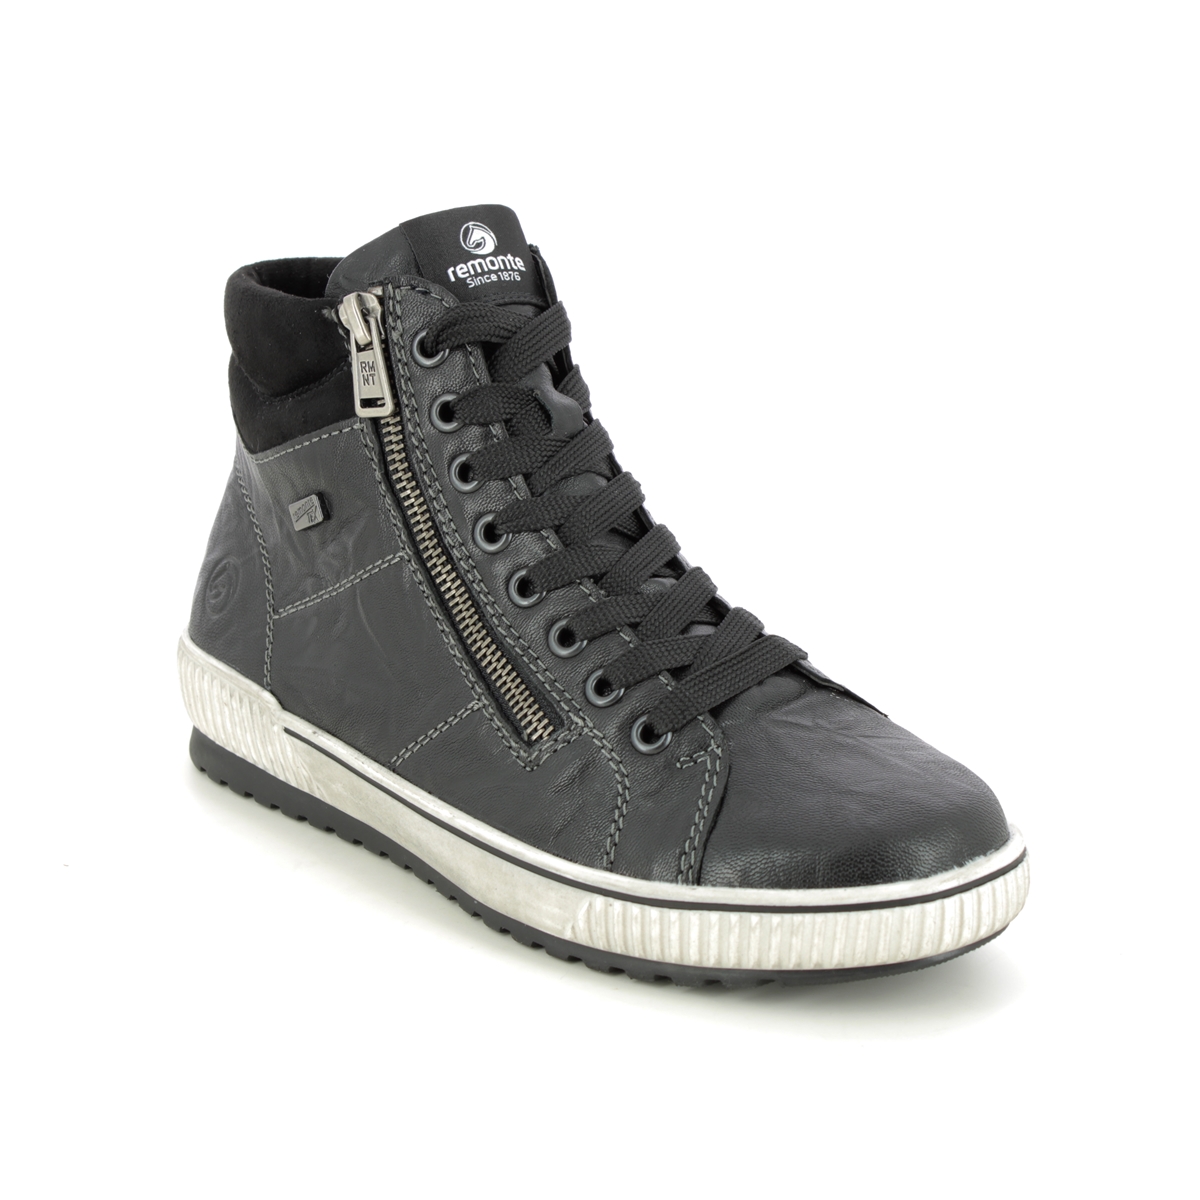 Remonte Tanaloto Tex Black Leather Womens Hi Tops D0772-01 In Size 37 In Plain Black Leather